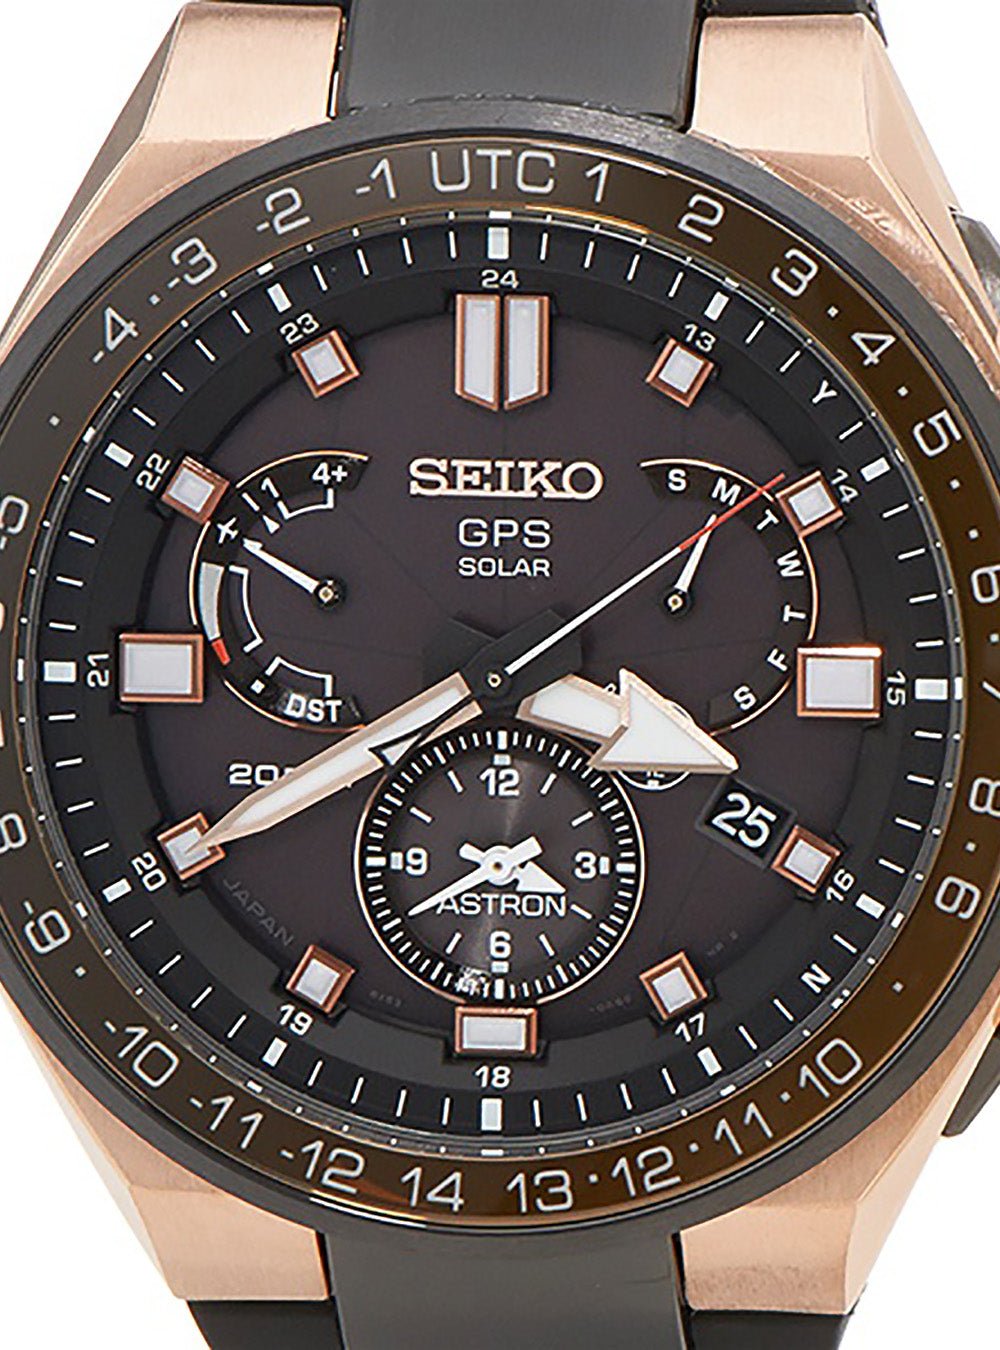 SEIKO ASTRON GPS SOLAR EXECTIVE SPORTS LINE SBXB170 MADE IN JAPAN JDMWRISTWATCHjapan-select